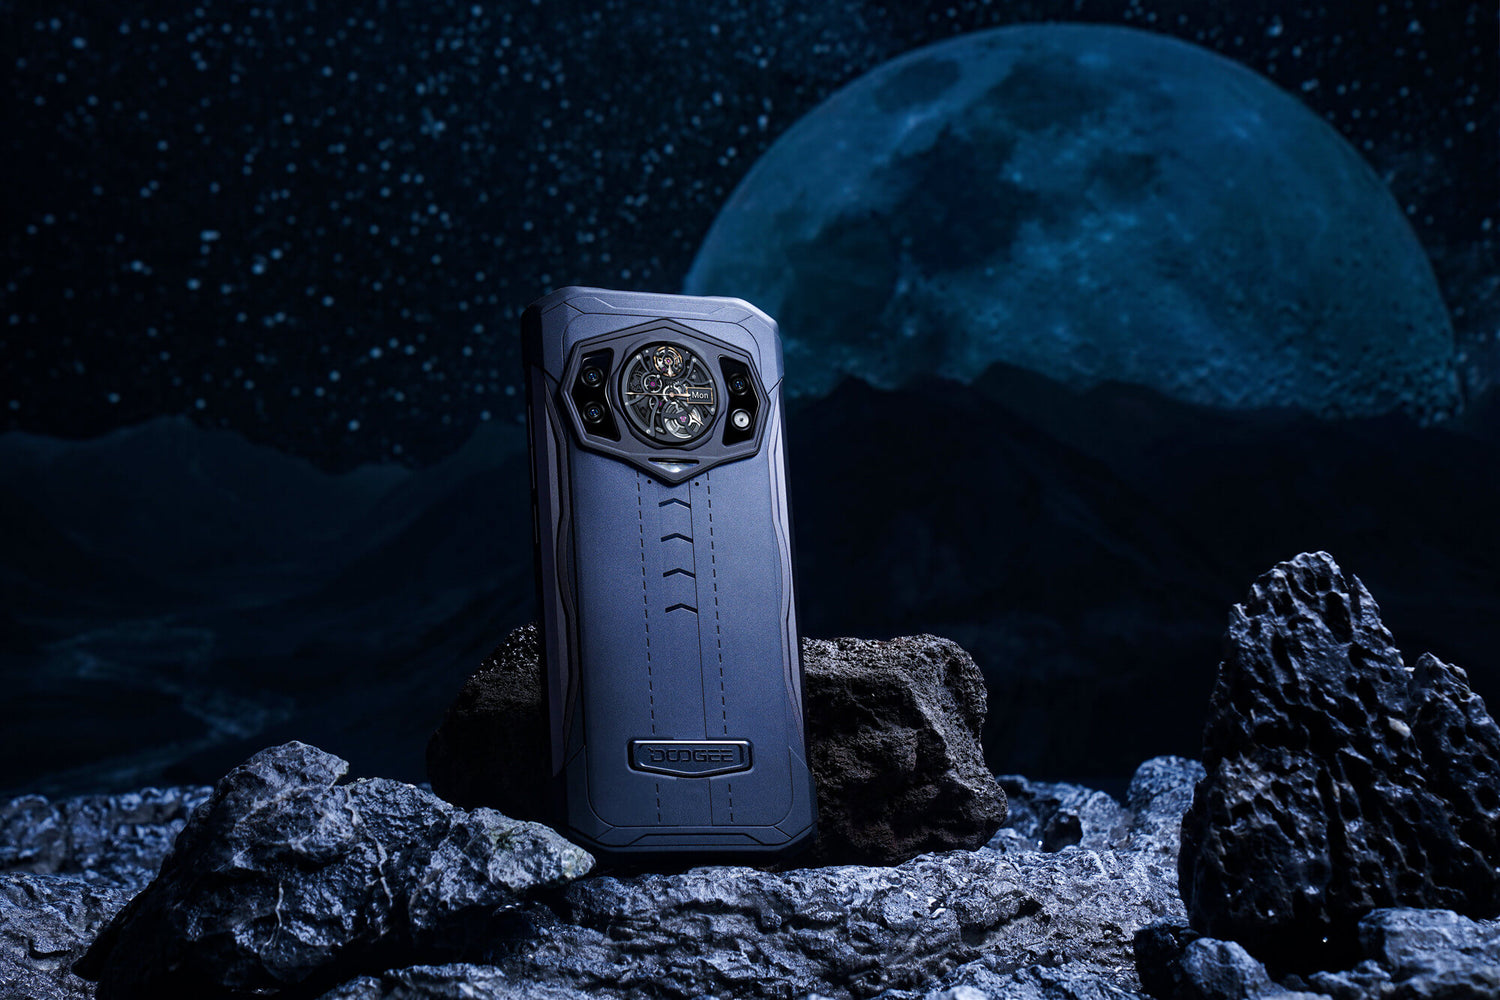 Doogee S98 Is Expected To Launch With Dual-Screen & Night Vision Camera | Doogee